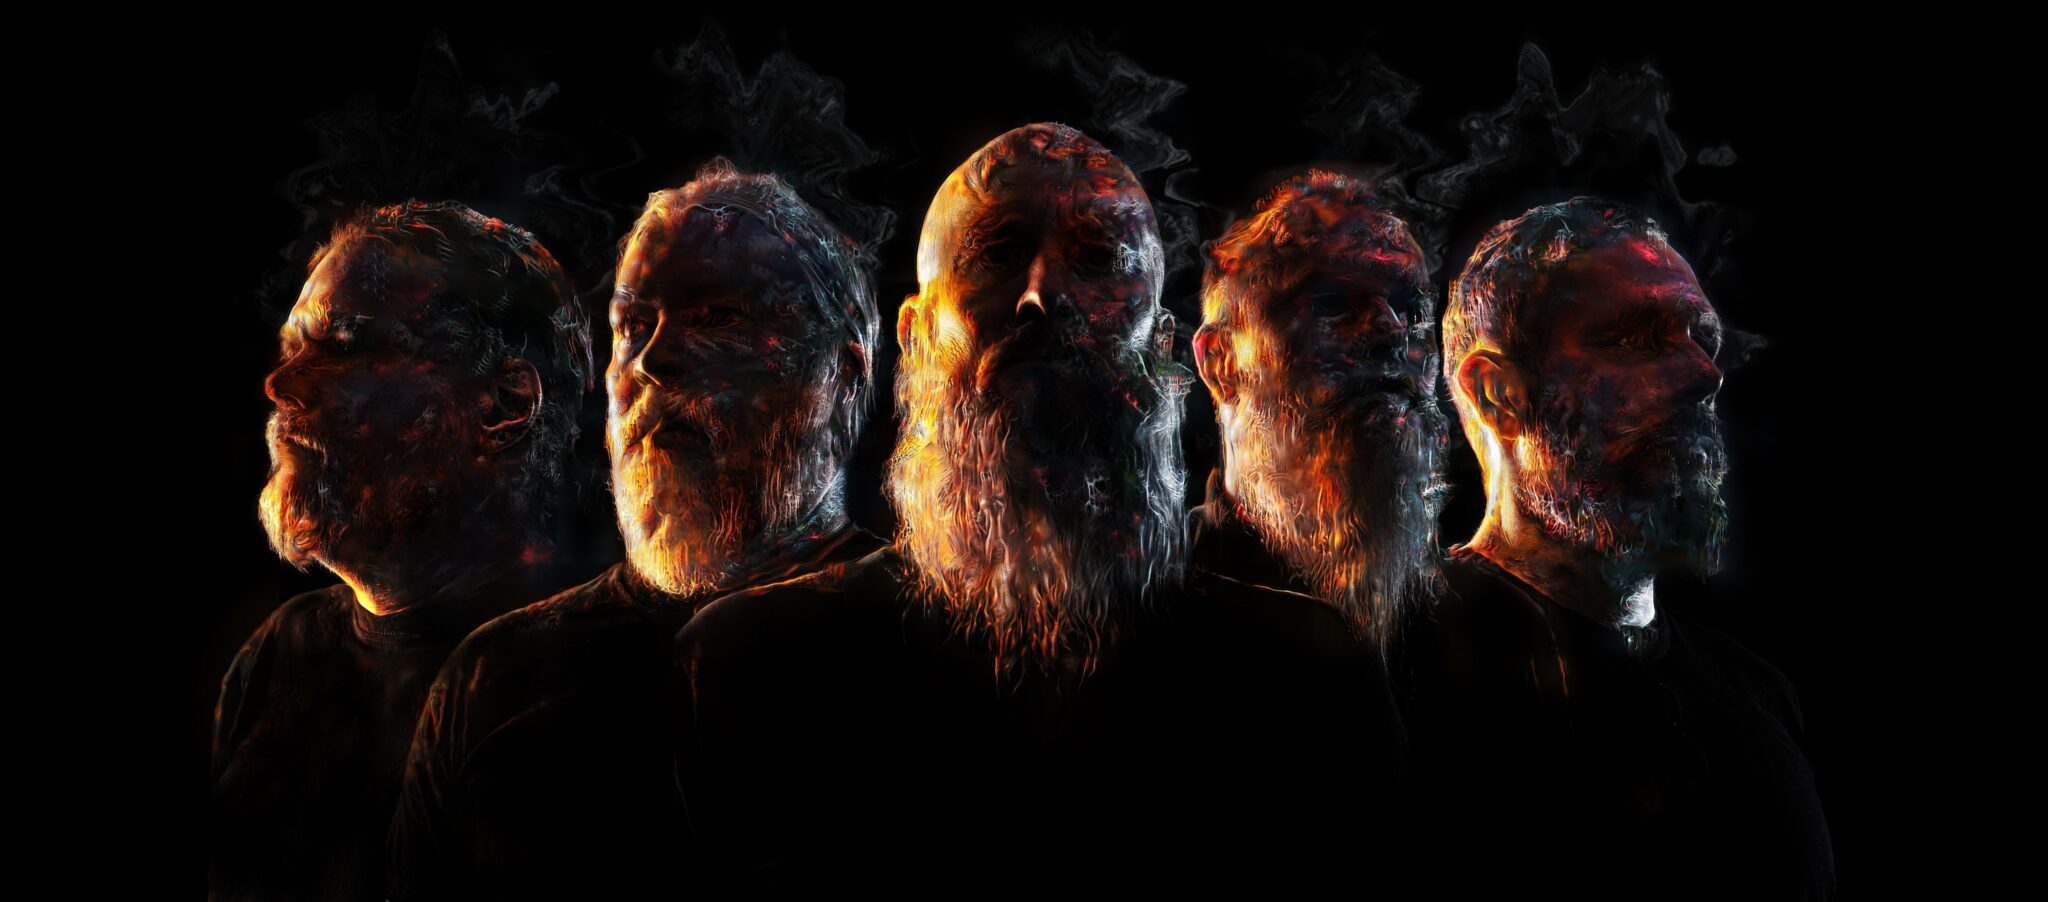 Read more about the article MESHUGGAH released new album “Immutable” and a music video for “Broken Cog”!